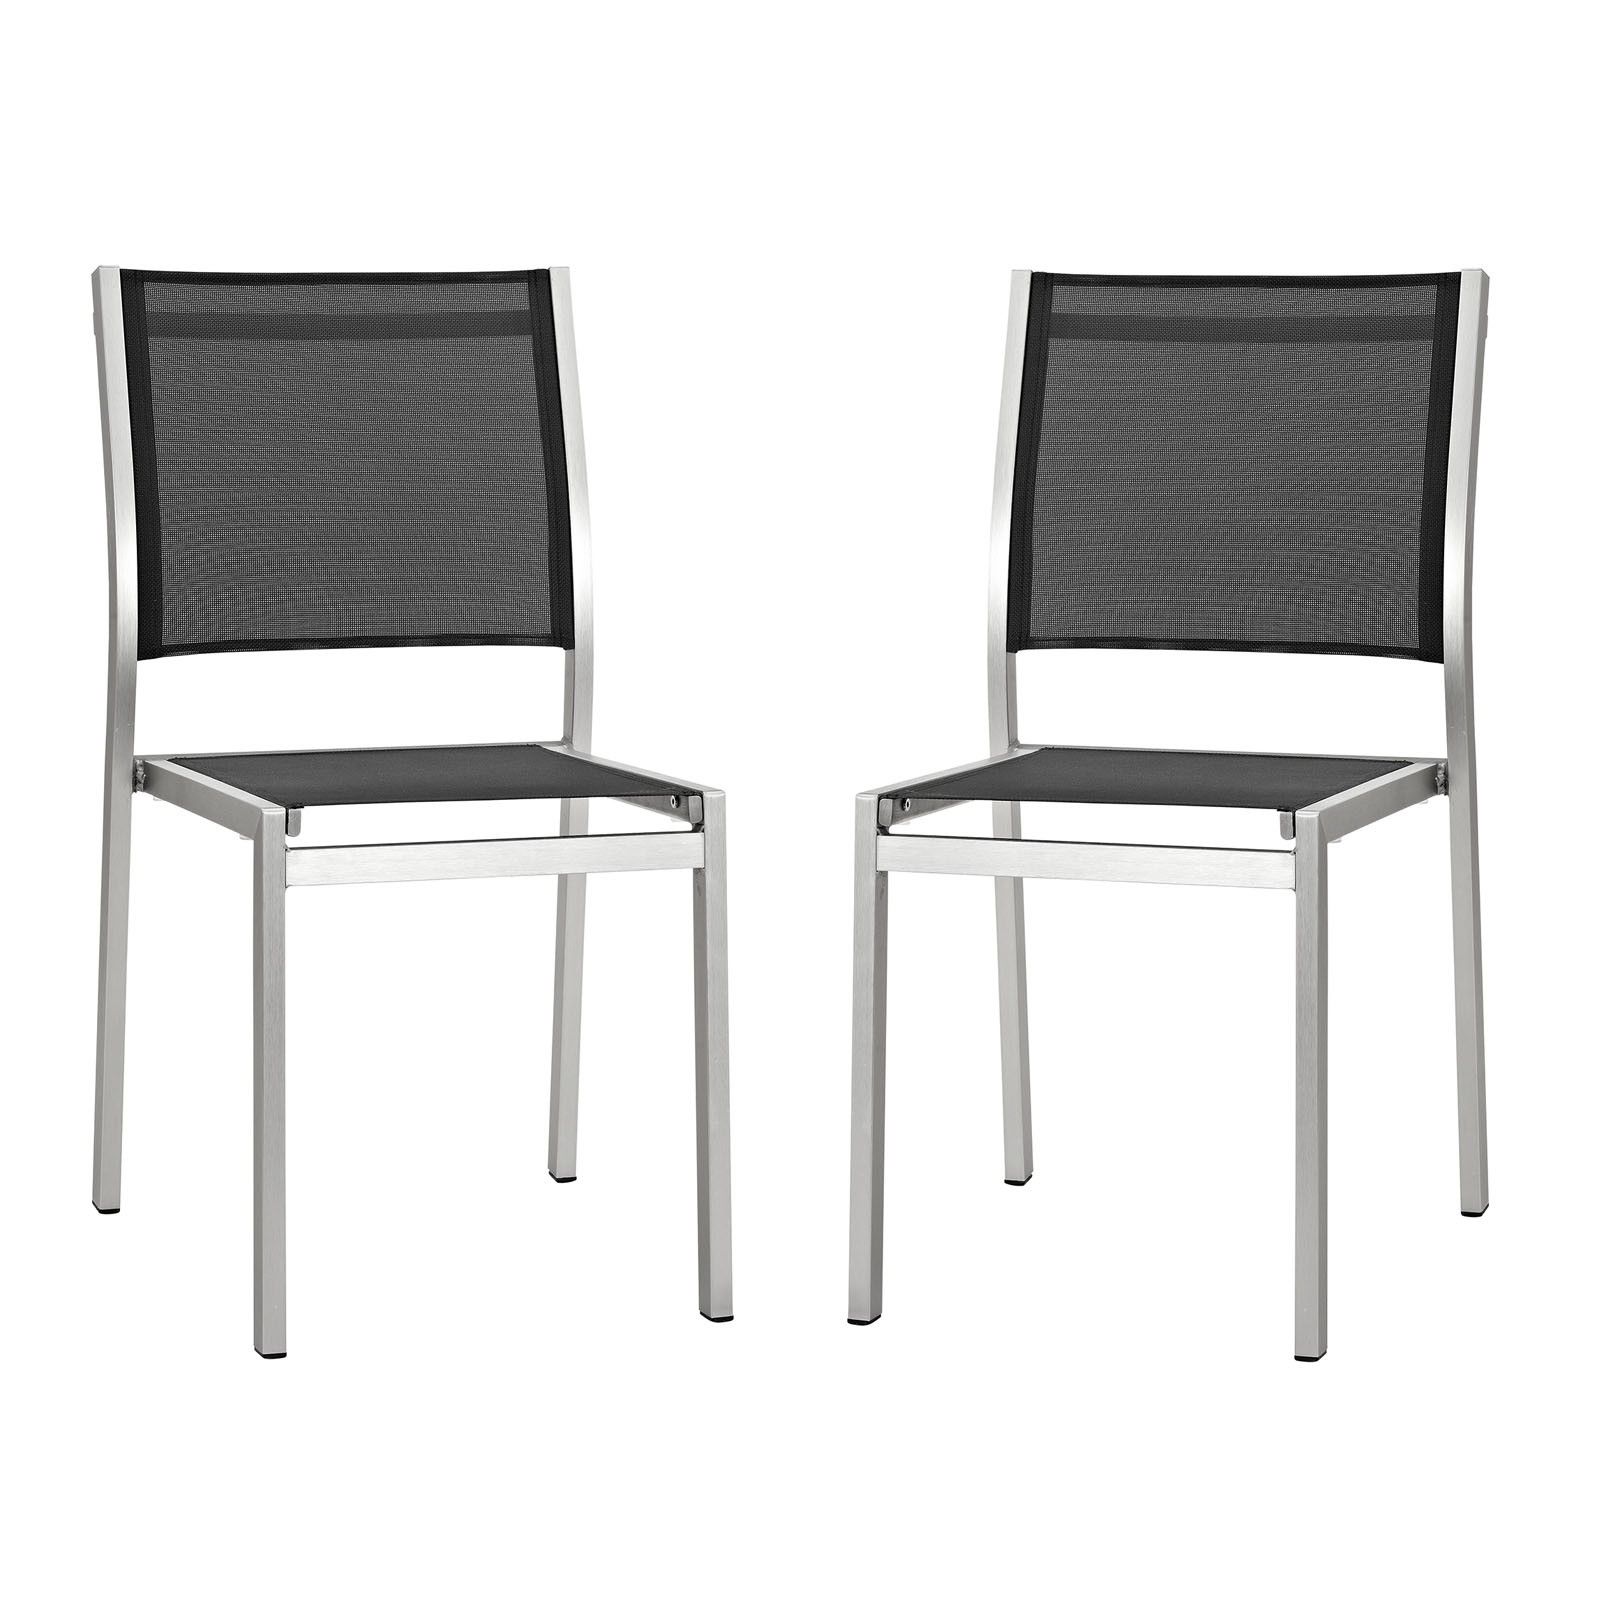 Modterior :: Outdoor :: Outdoor Chairs :: Shore Side Chair For Famous Shore Aluminum Outdoor Chaises (View 11 of 25)